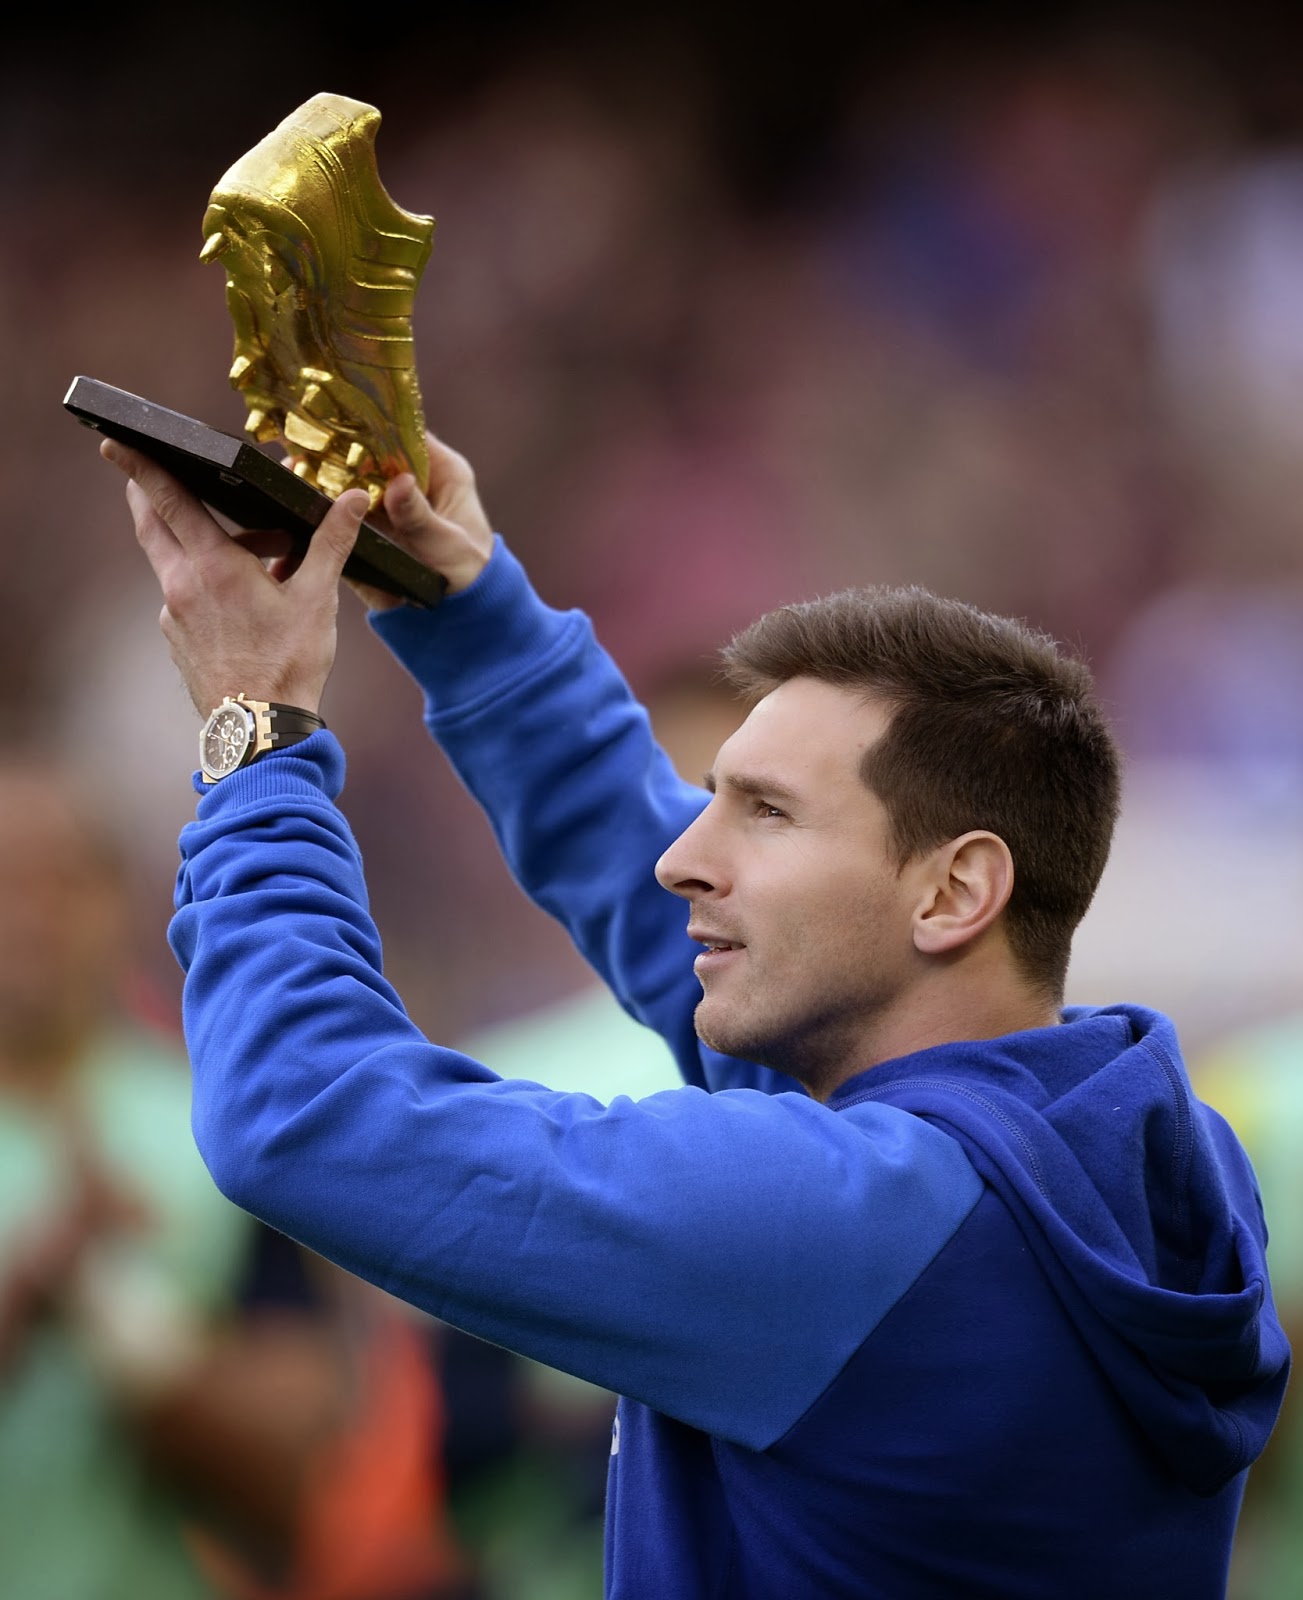 Lionel Messi wins third time Golden Shoe Award - Images Archival Store